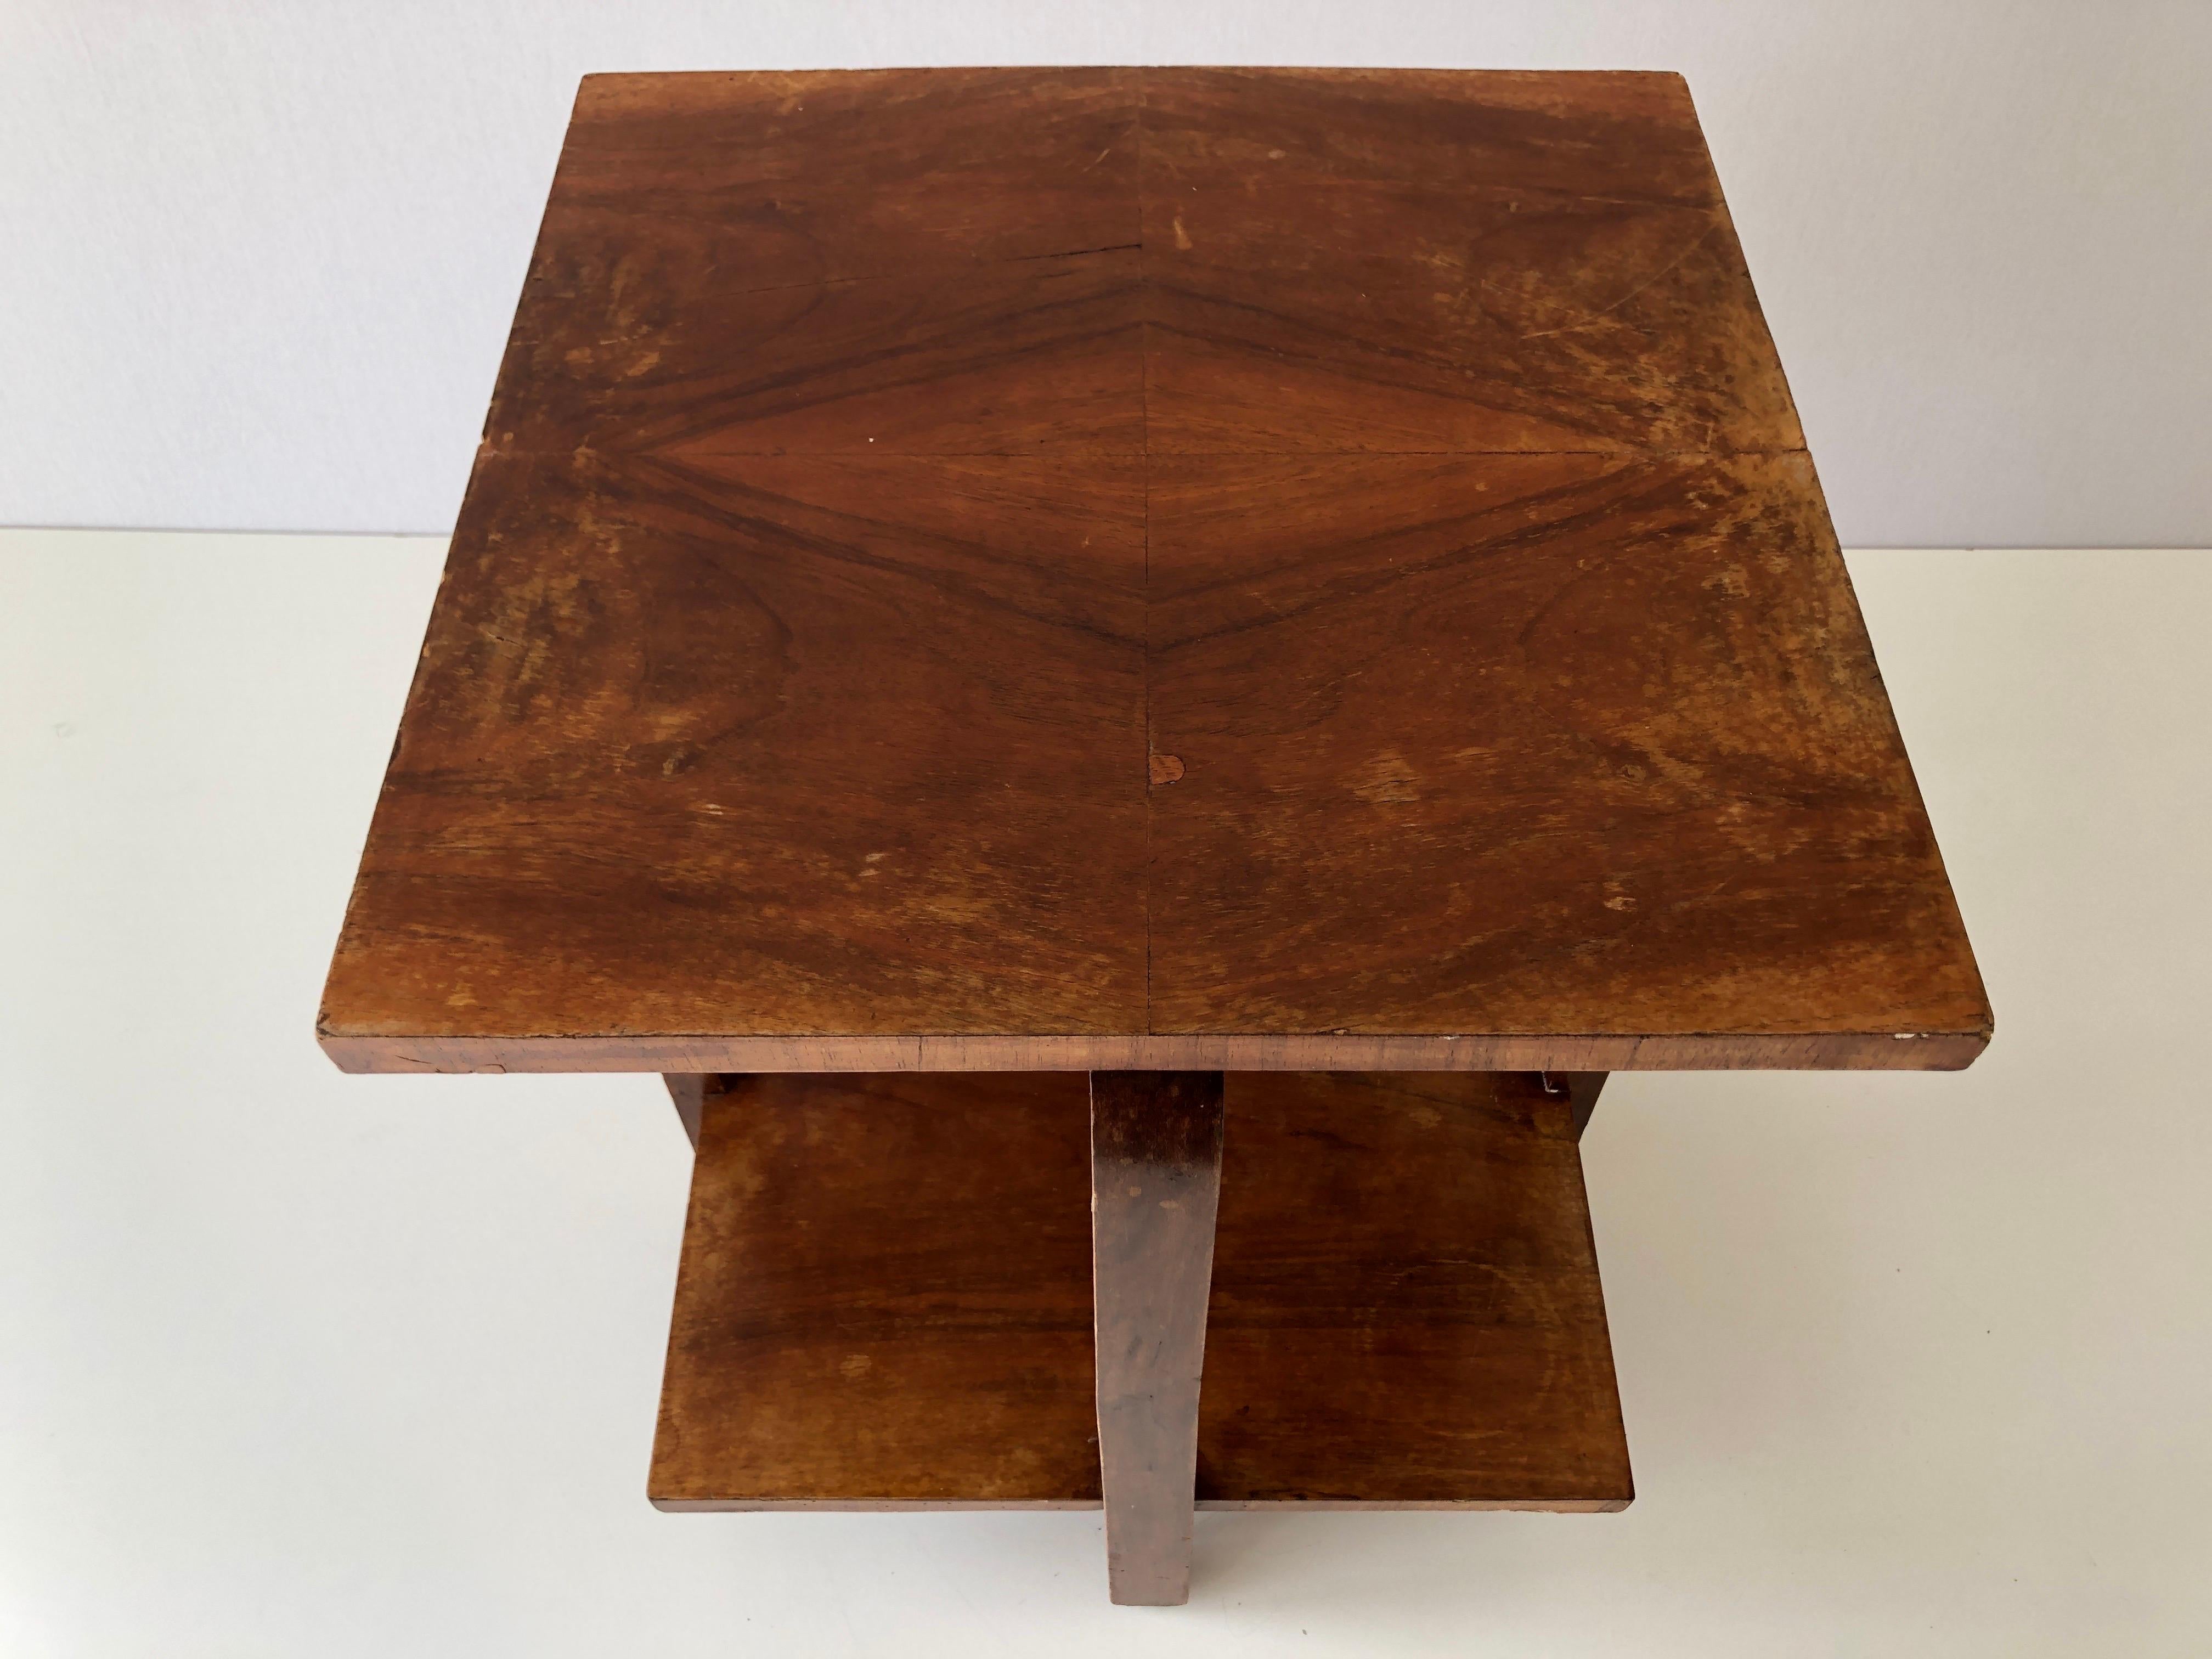 Art Deco Square Wood Corner or End Table, 1940s, Made in Italy For Sale 1